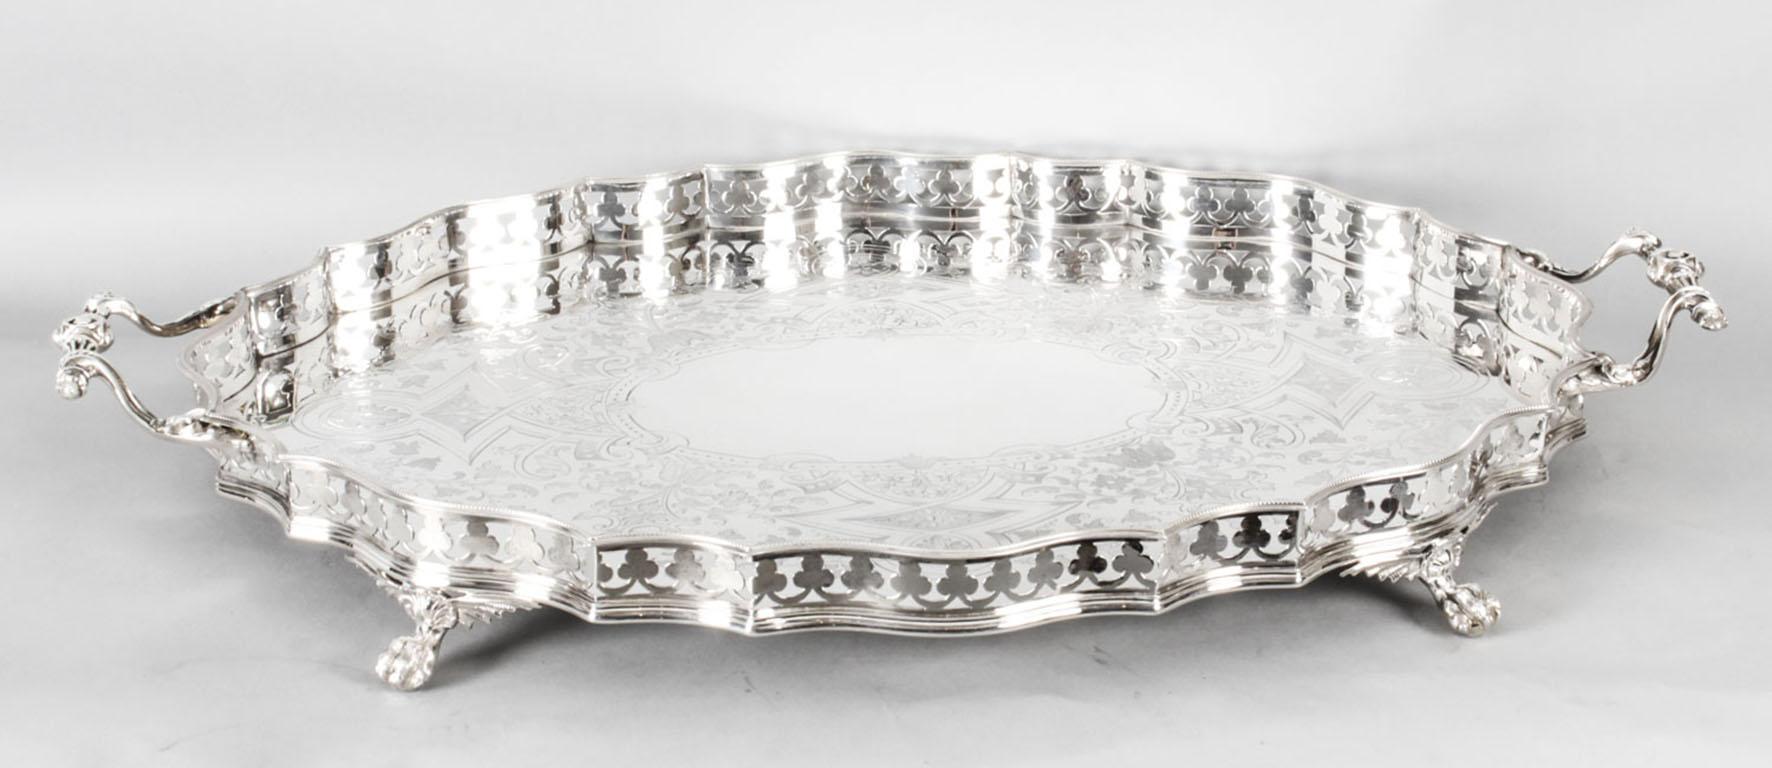 English Antique Victorian Oval Silver Plated Gallery Tray, 19th Century